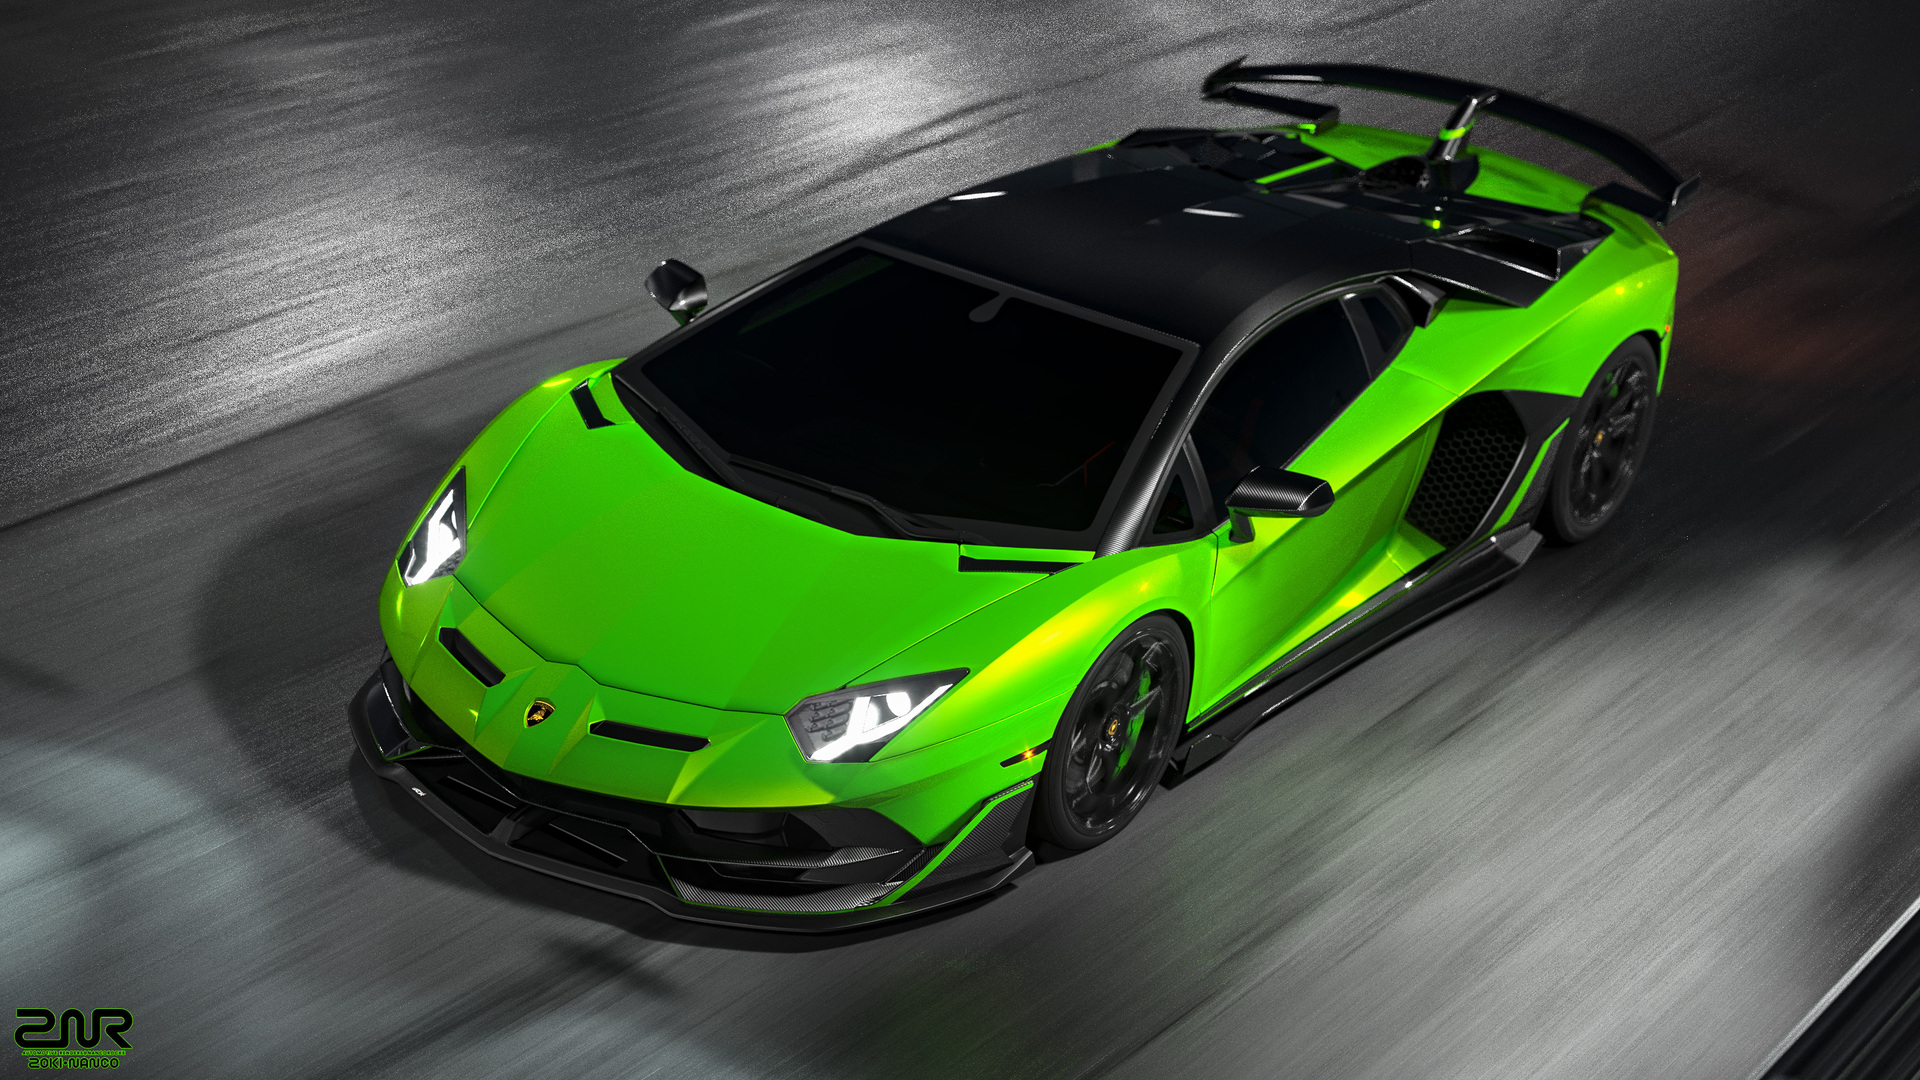 Lamborghini full hd, hdtv, fhd, 1080p wallpapers hd, desktop backgrounds  1920x1080, images and pictures